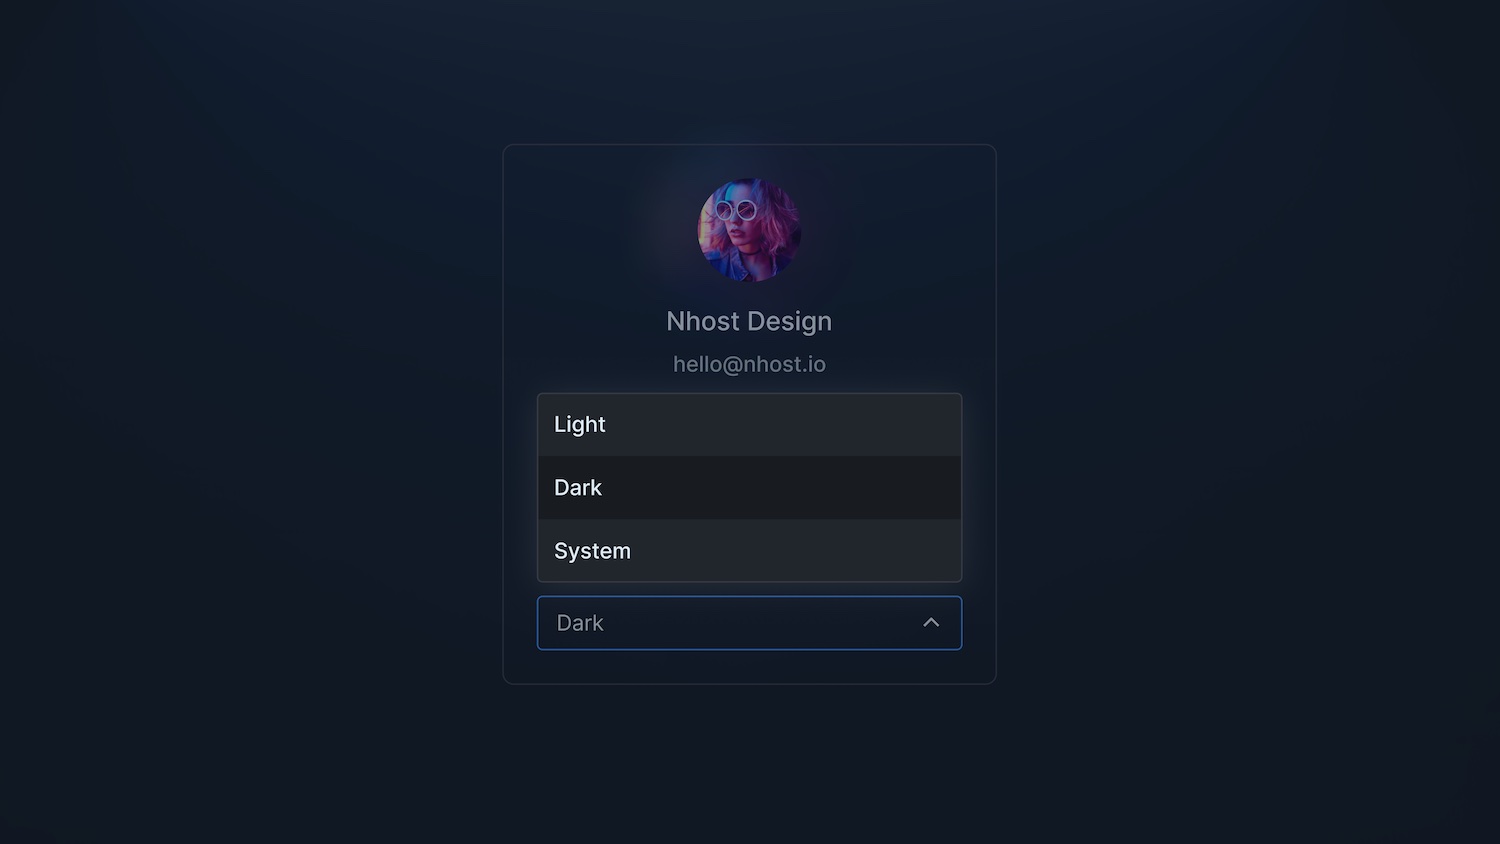 A theme selector with three options: Light, Dark, and System